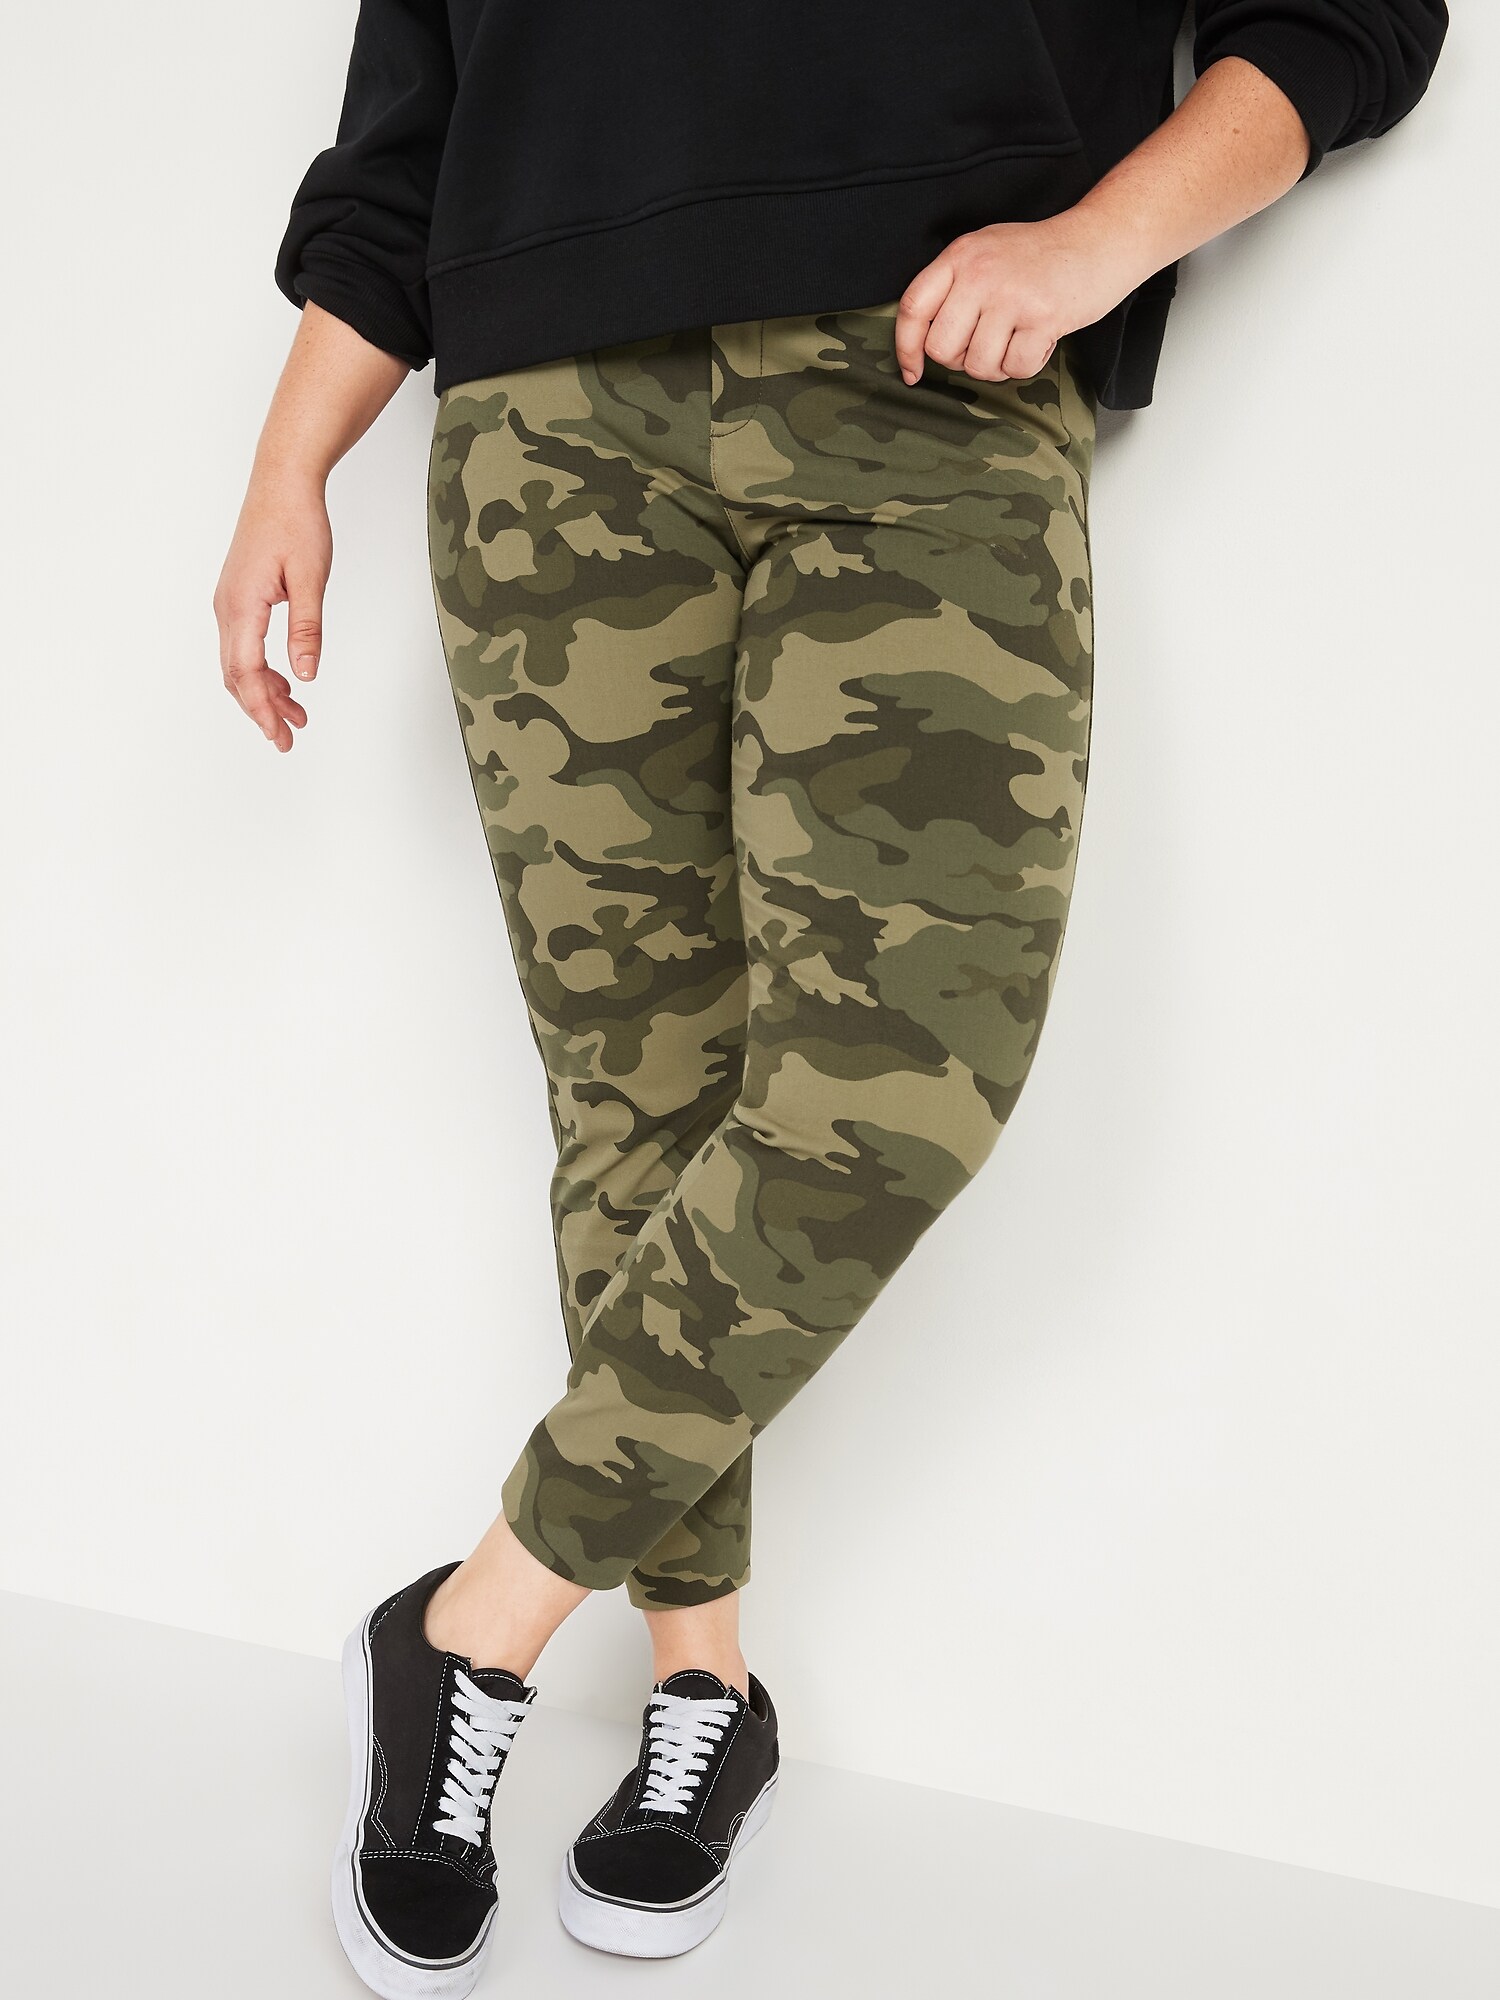 High-Waisted Patterned Pixie Ankle Pants